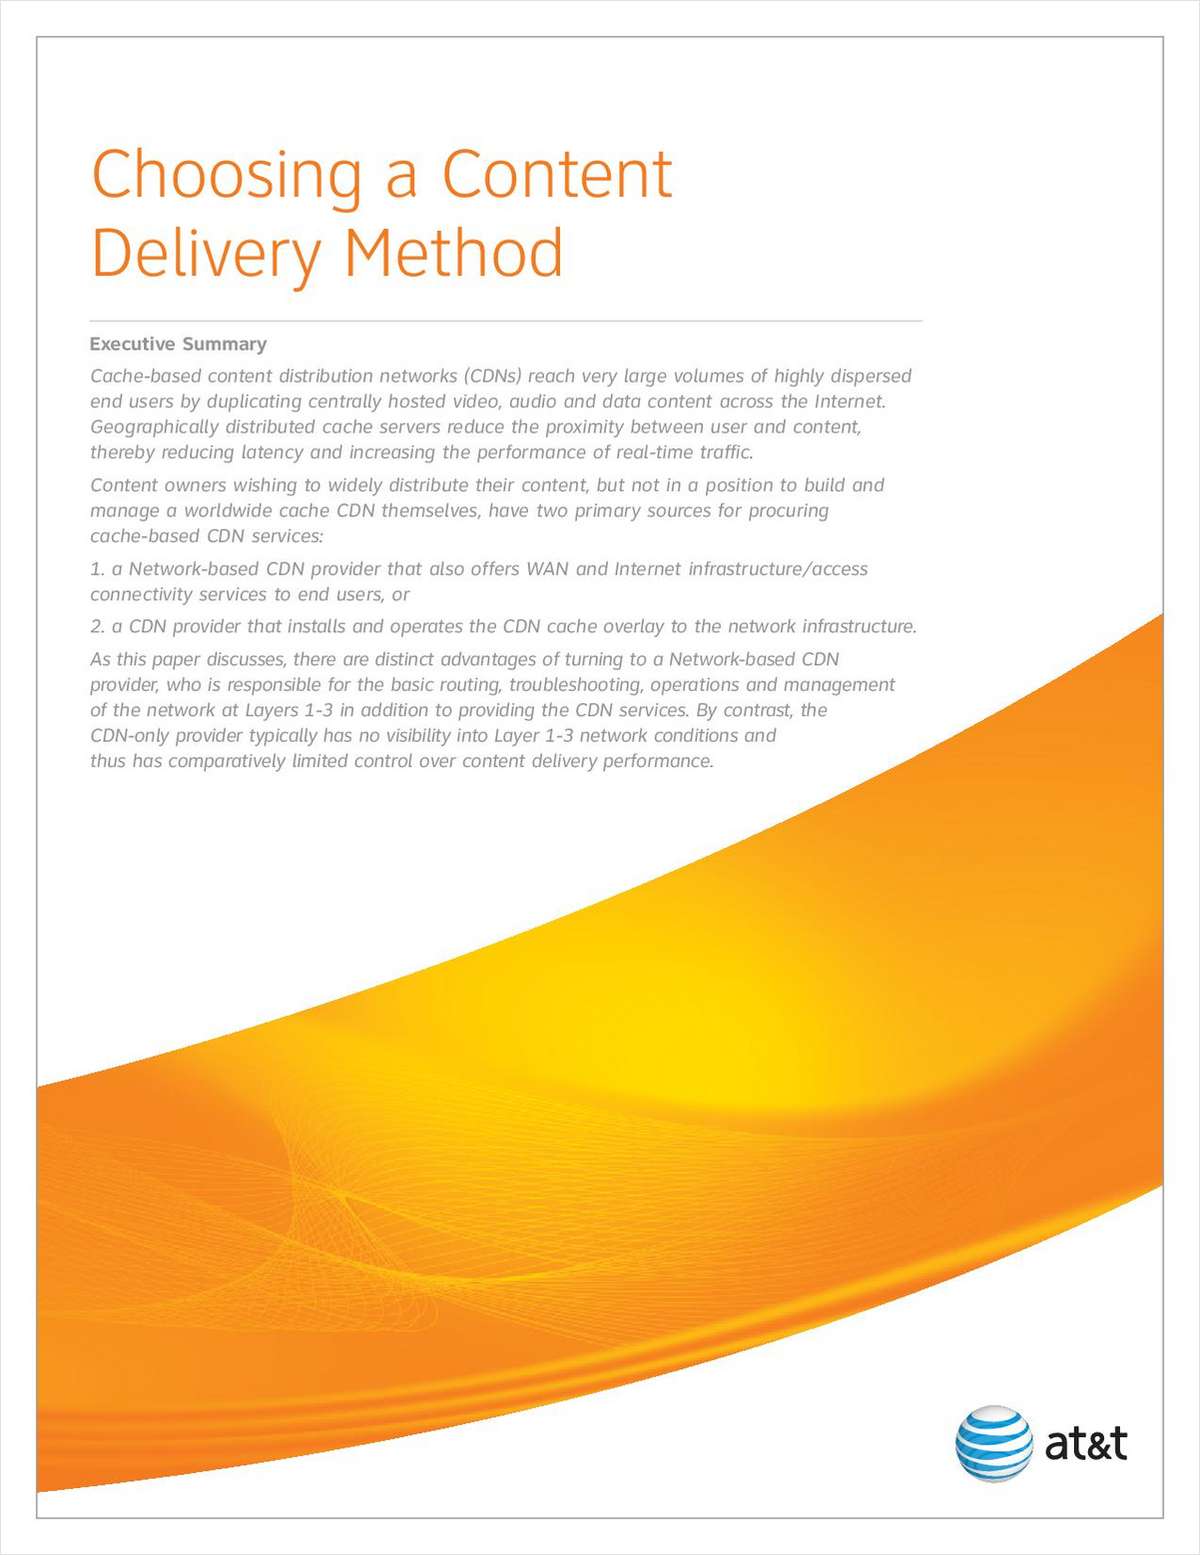 Choosing a Content Delivery Method